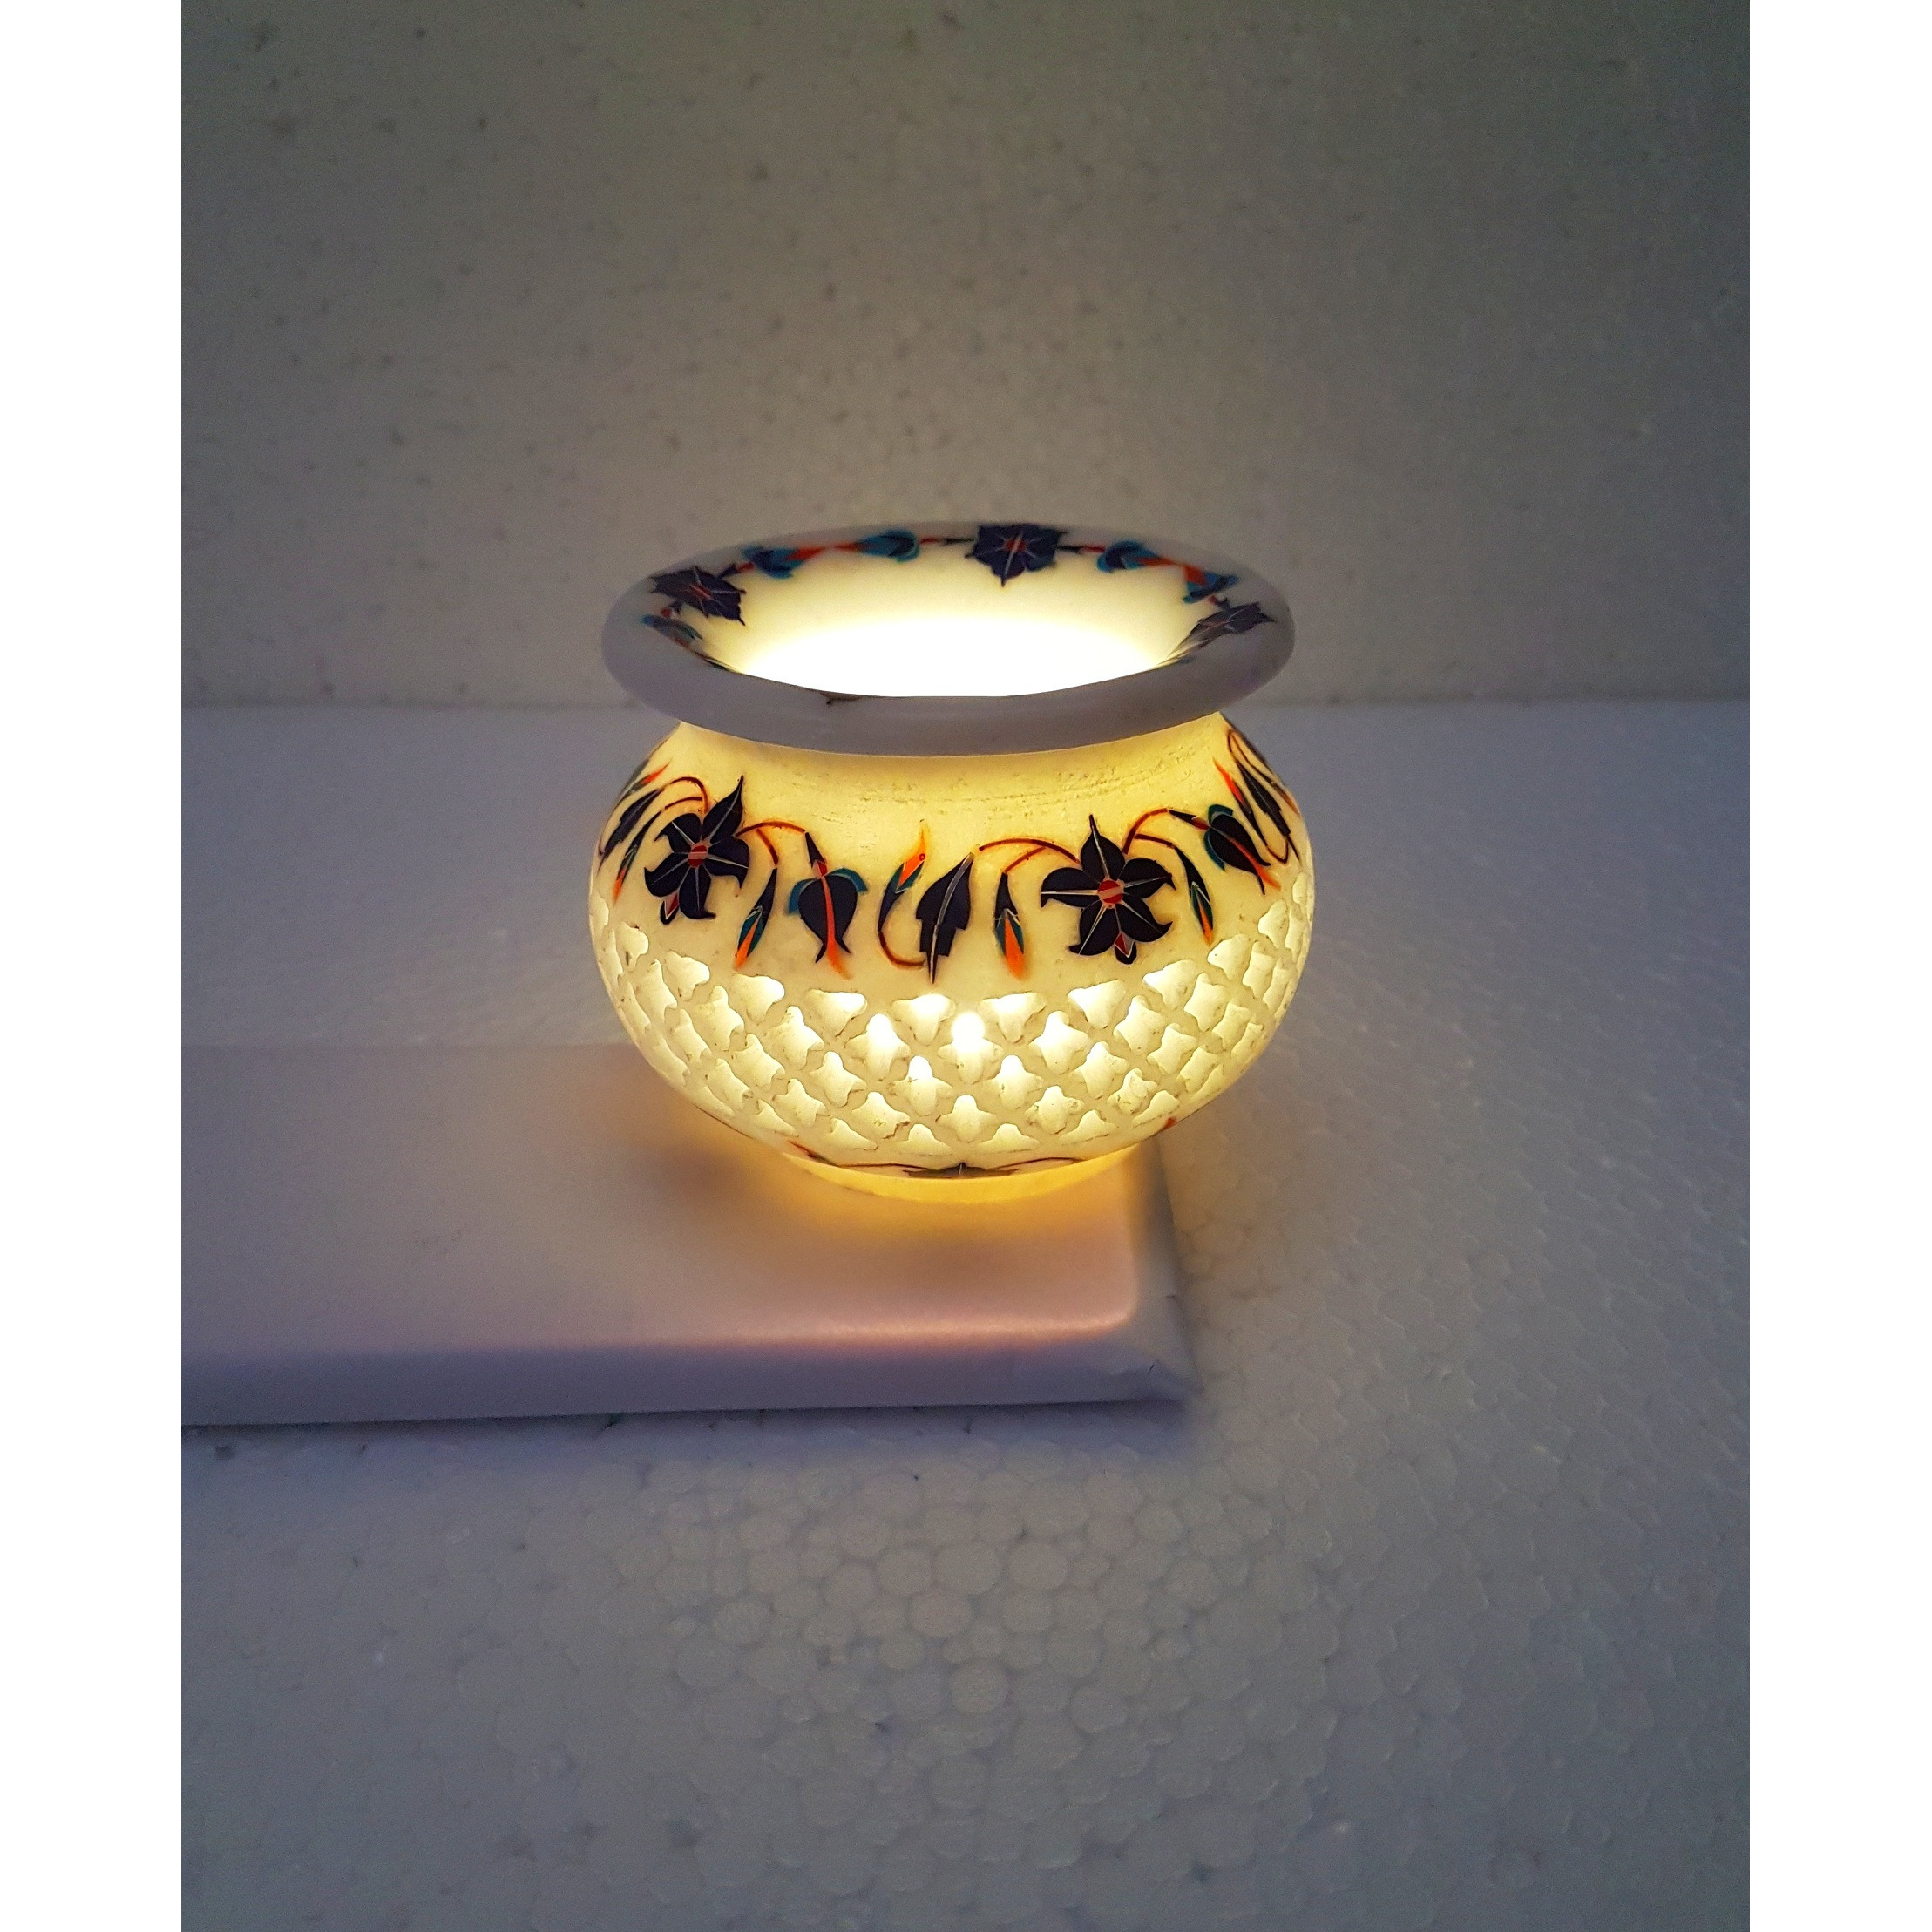 Marble Inlay & Filigree Handcrafted Candle Pot